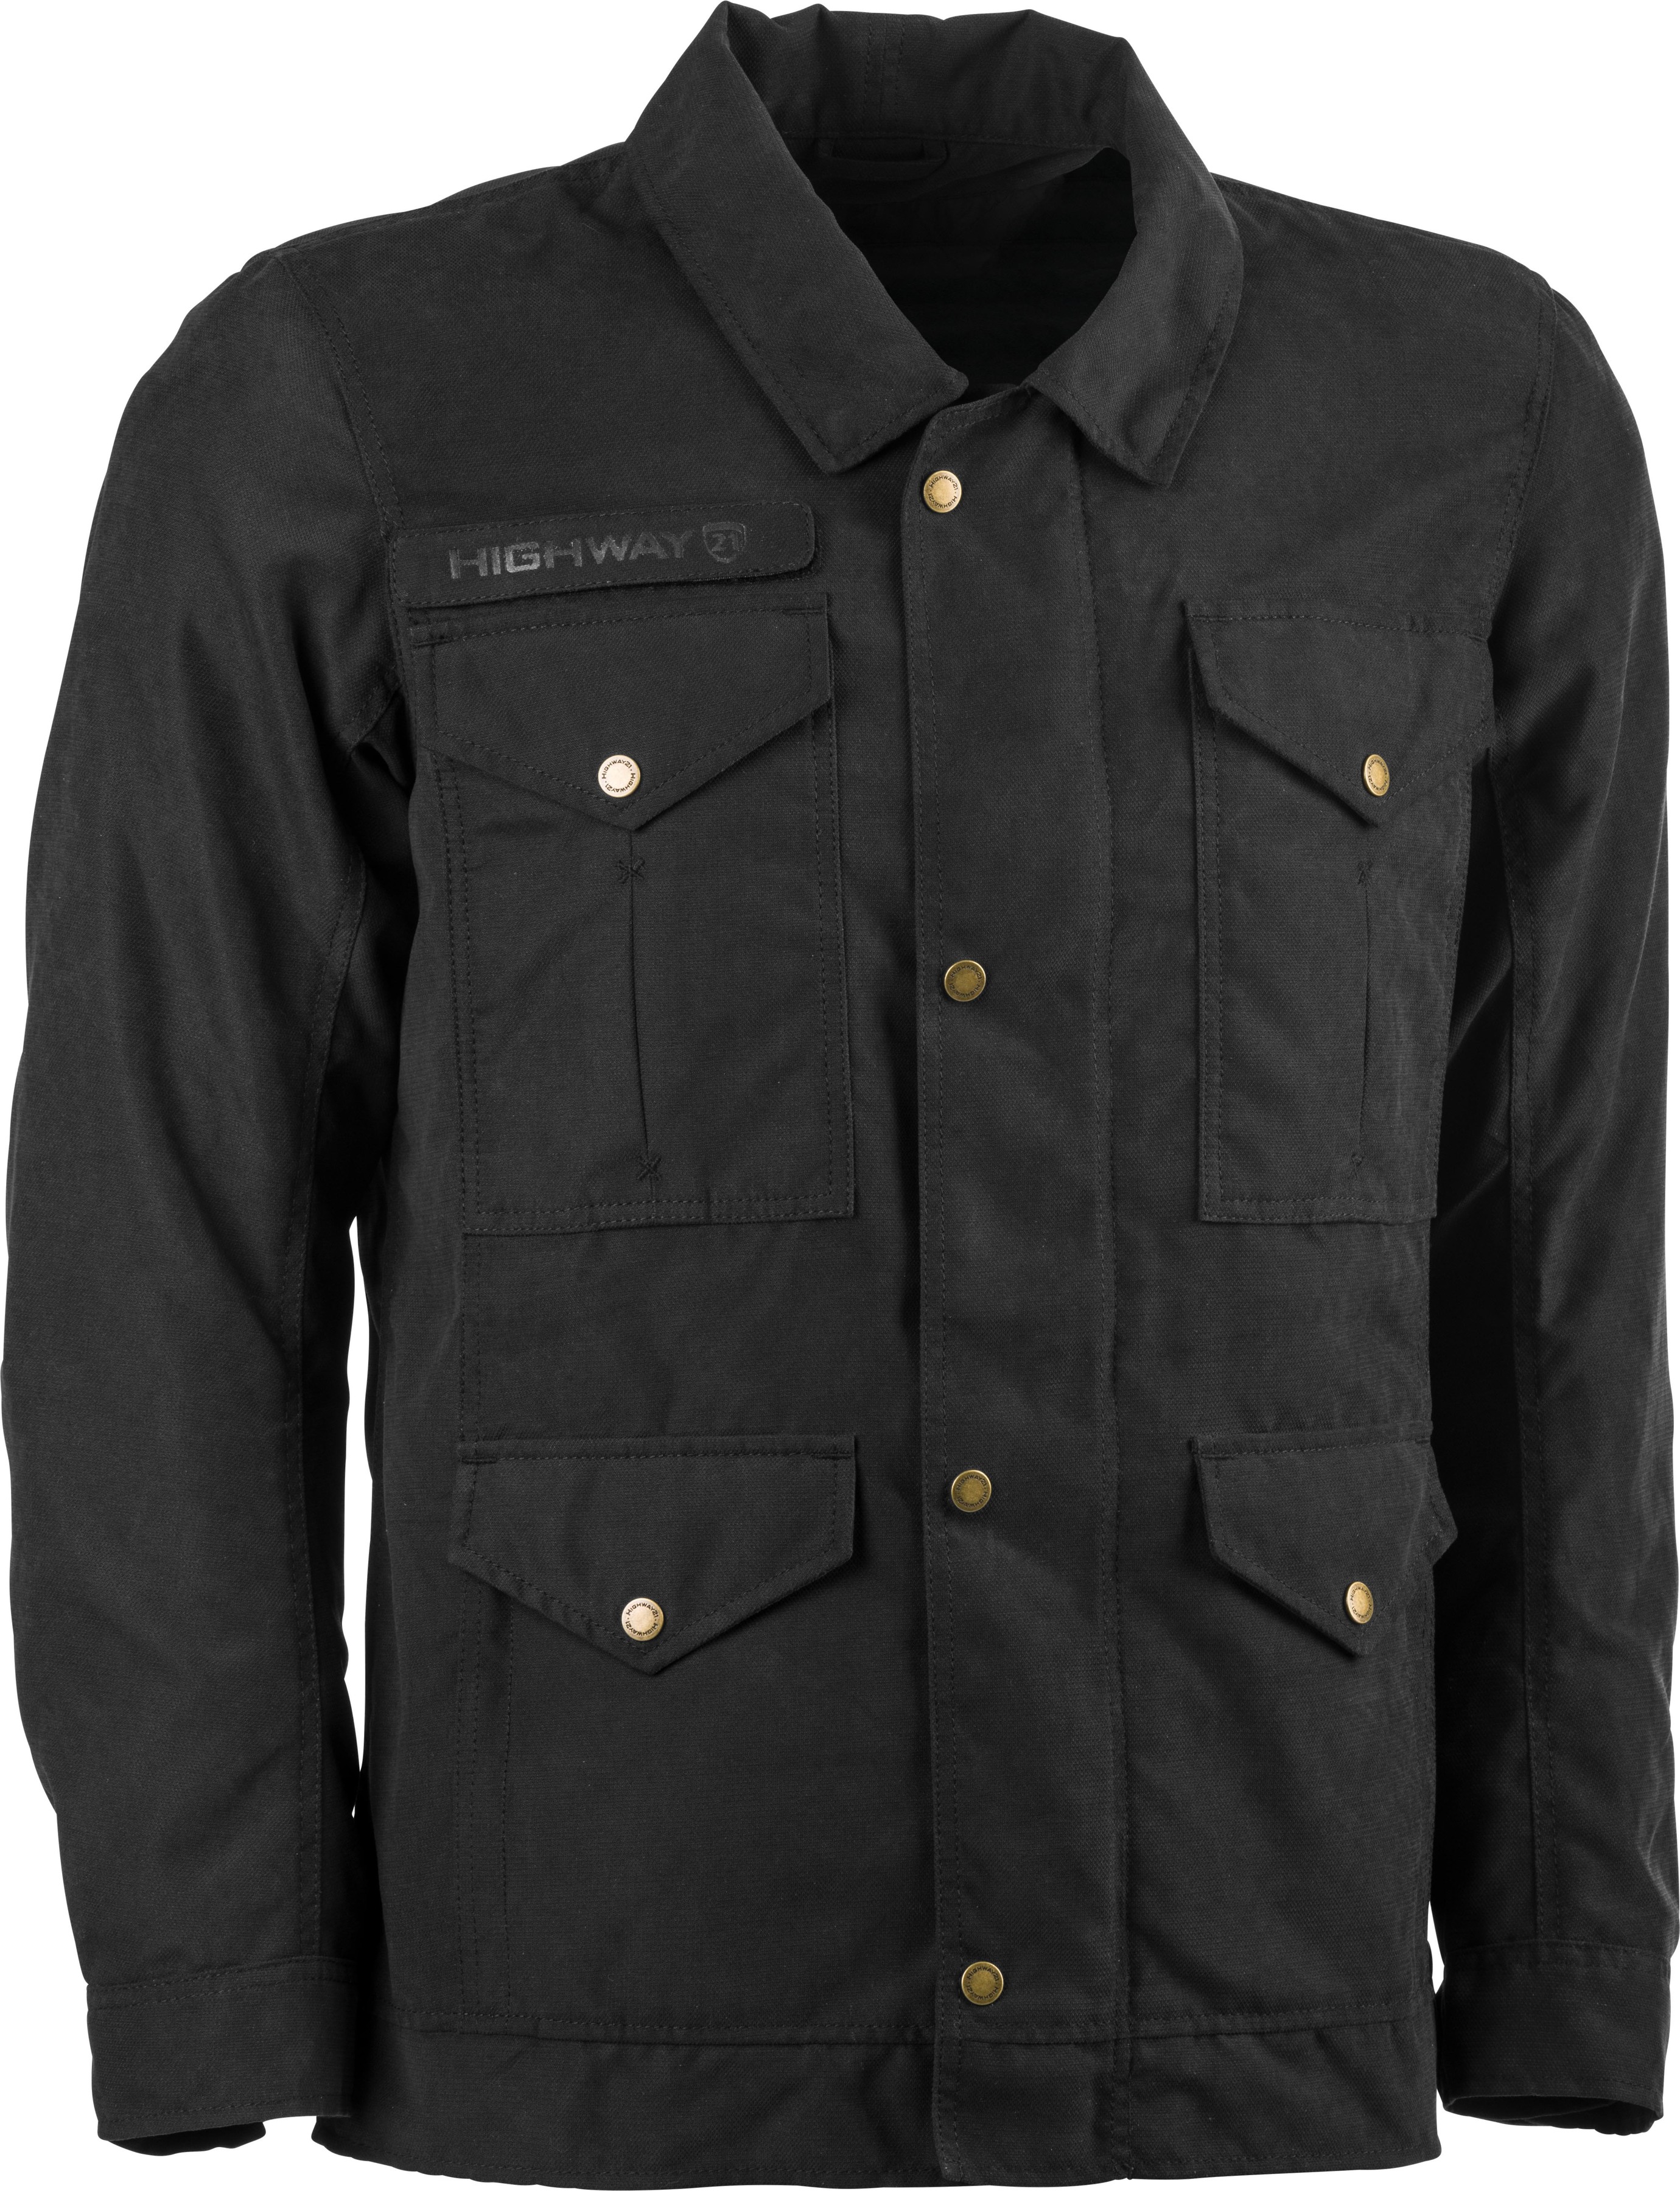 Winchester Riding Jacket Black 4X-Large - Click Image to Close